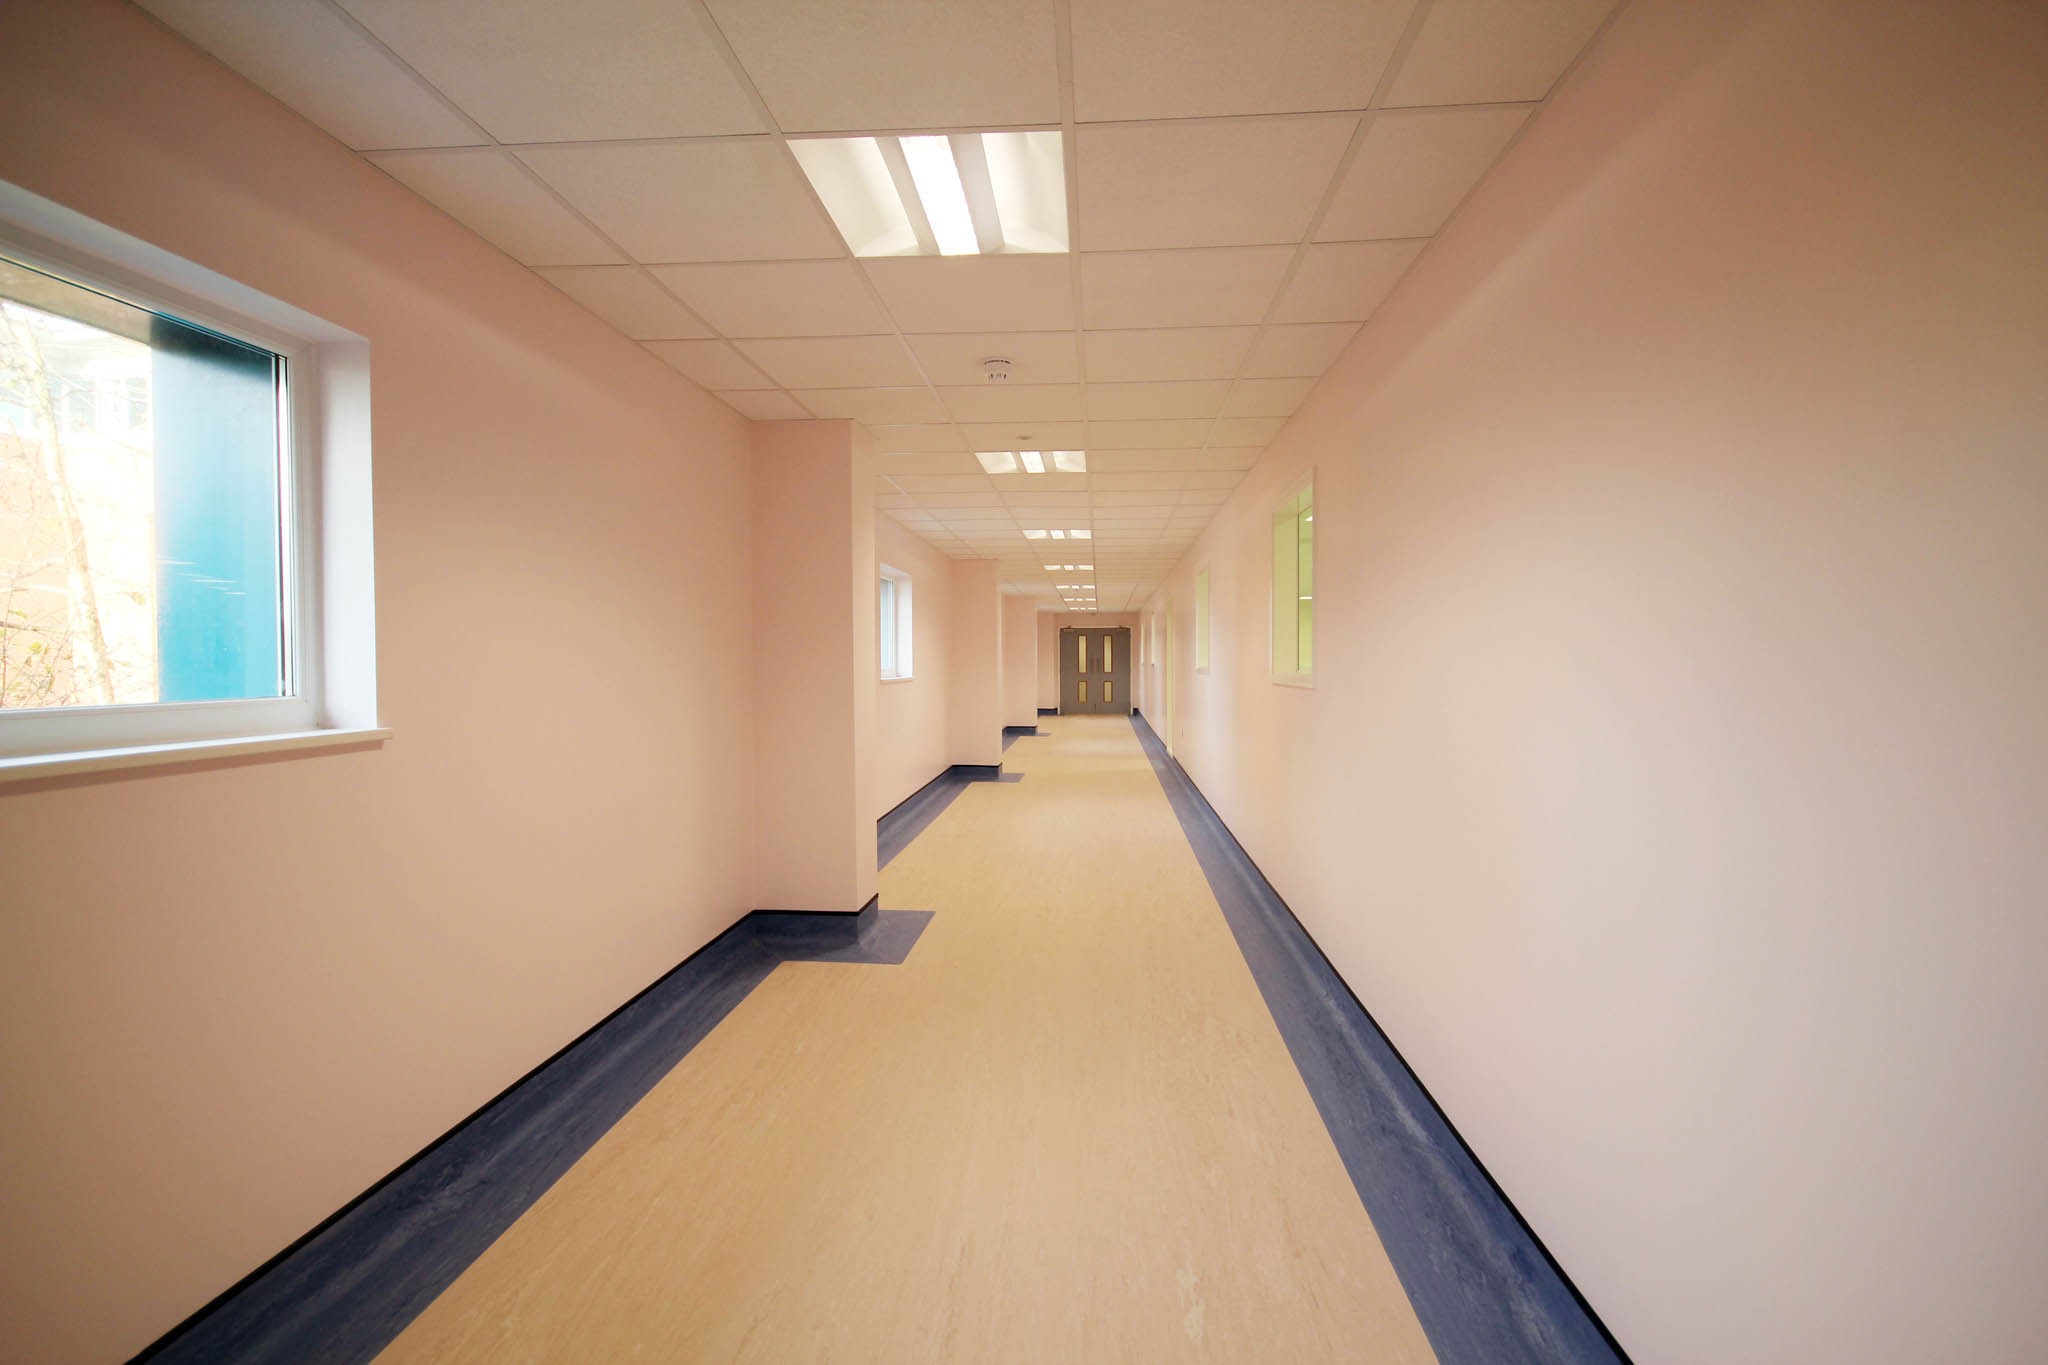 Our Projects - Wrightington, Wigan & Leigh NHS